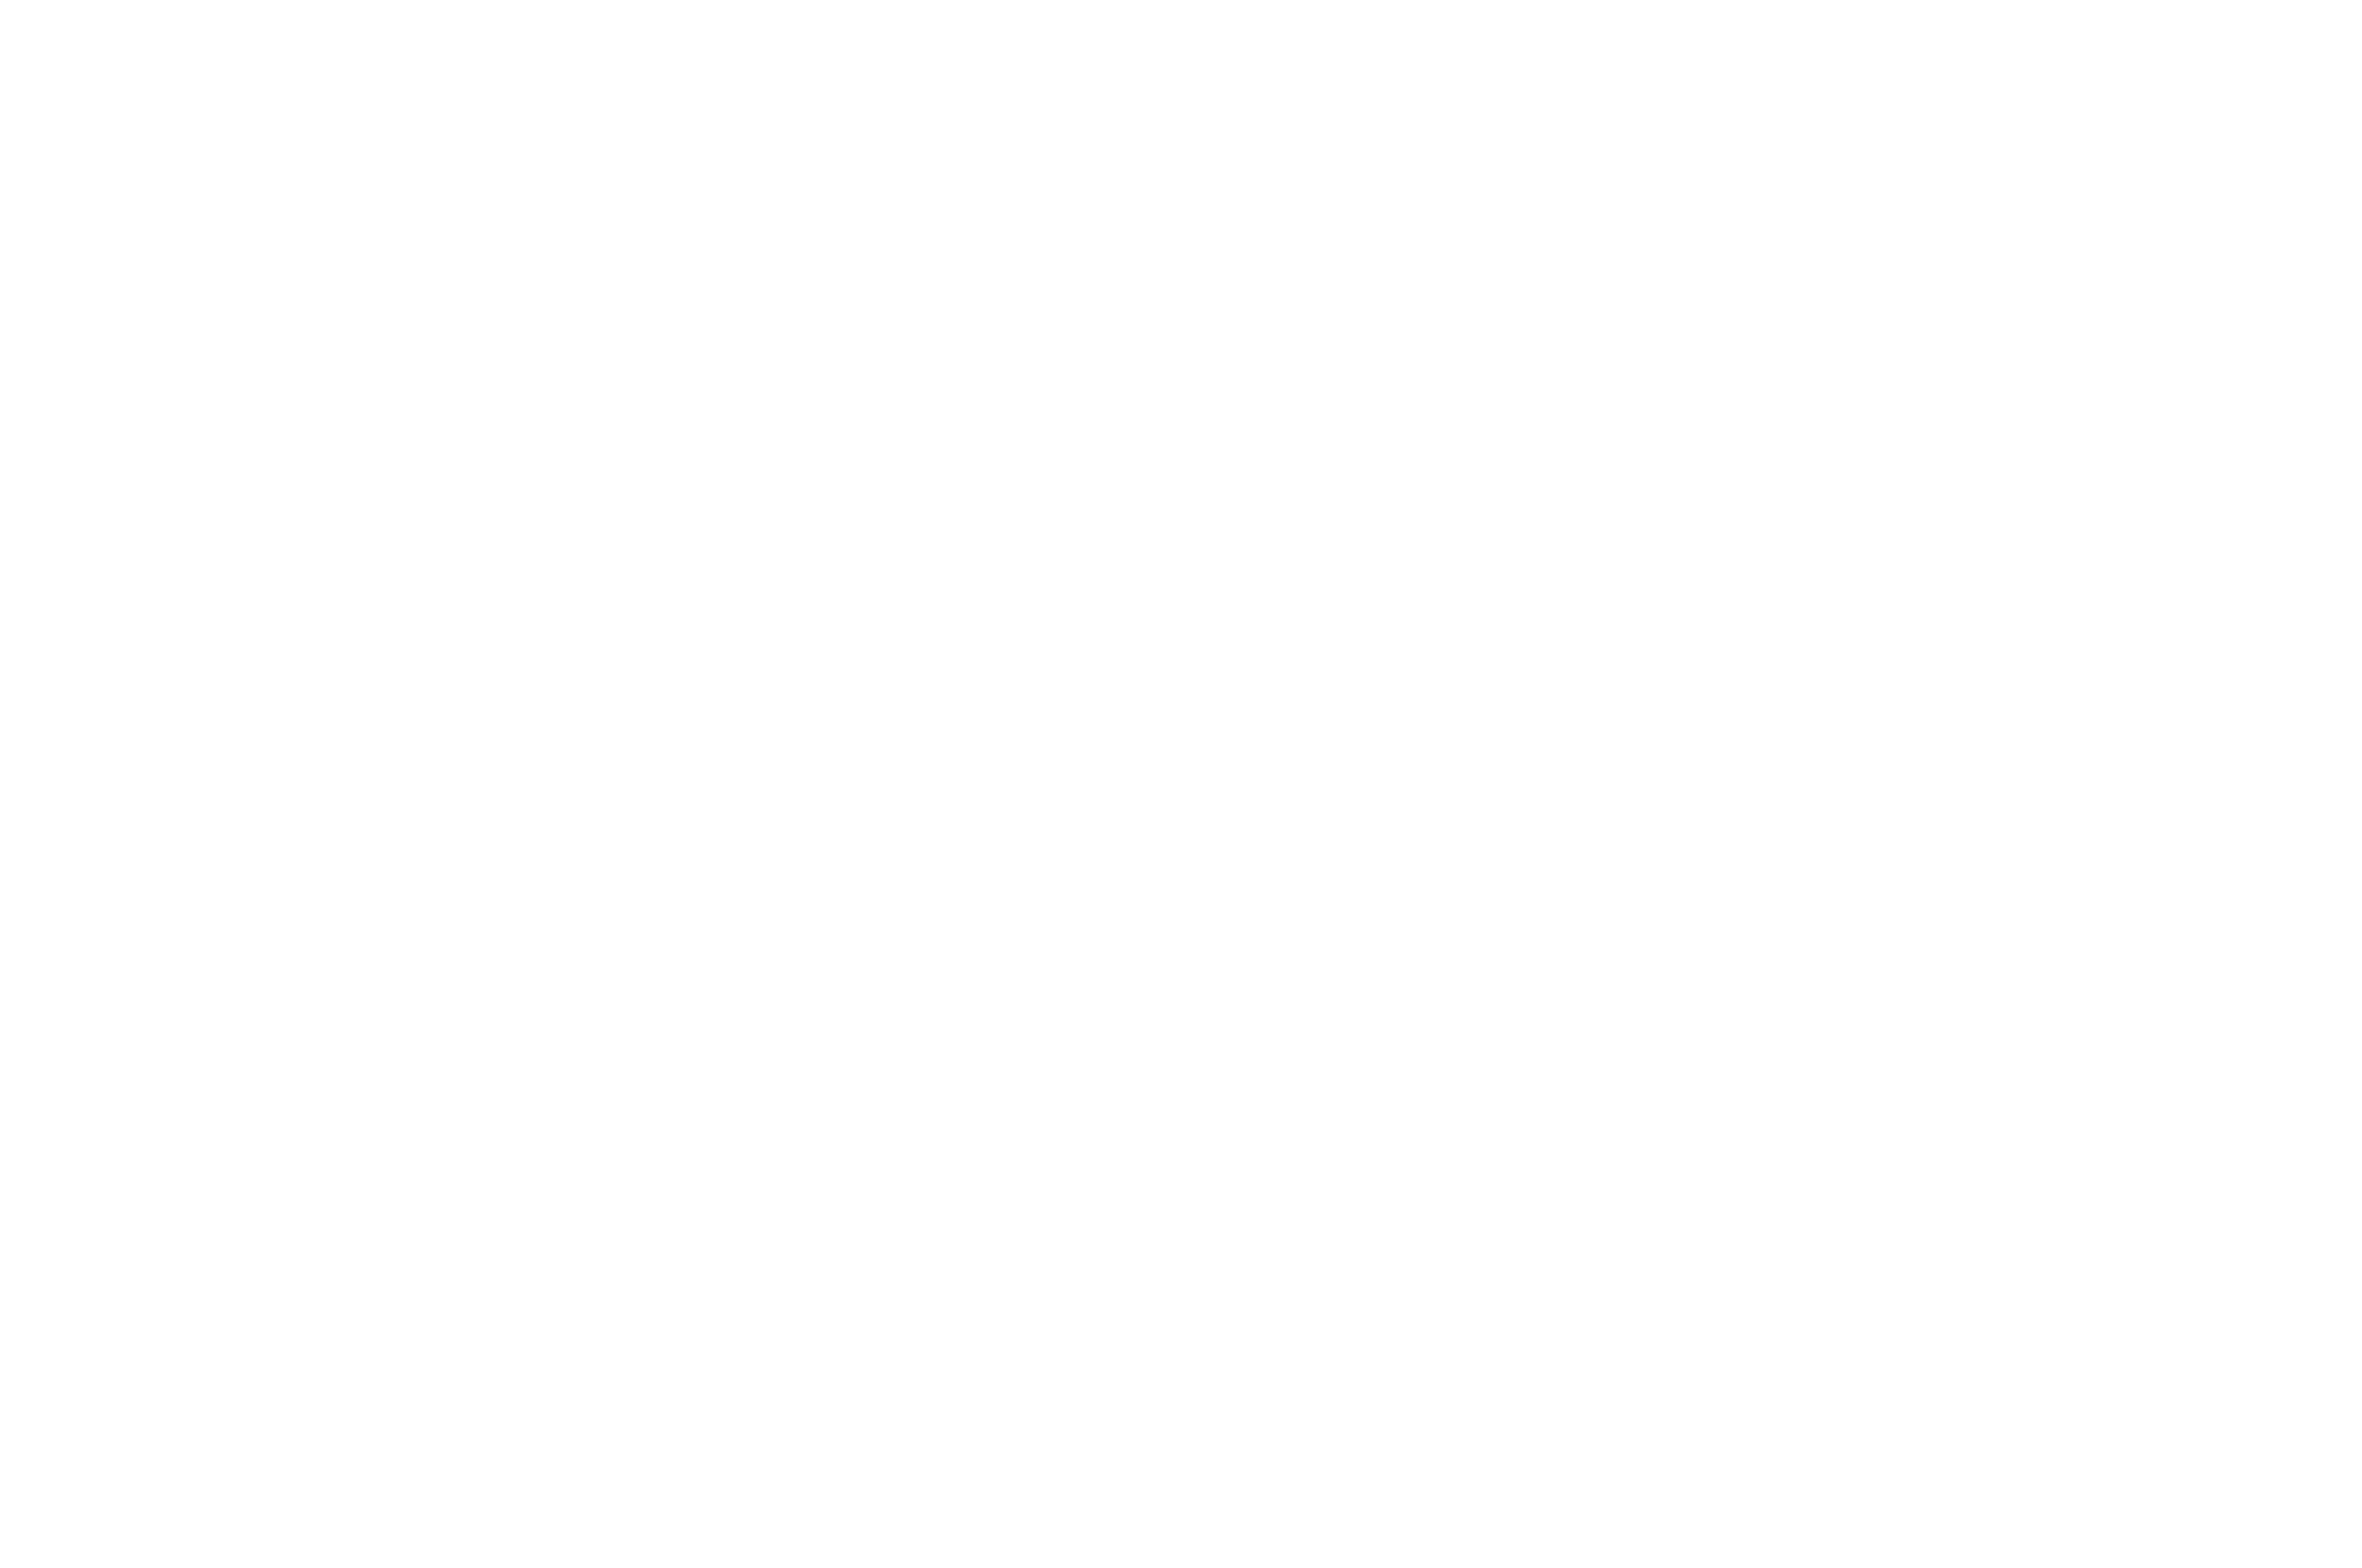 OFFICIALSELECTION-AdirondackFilmFestival-2020 White.png